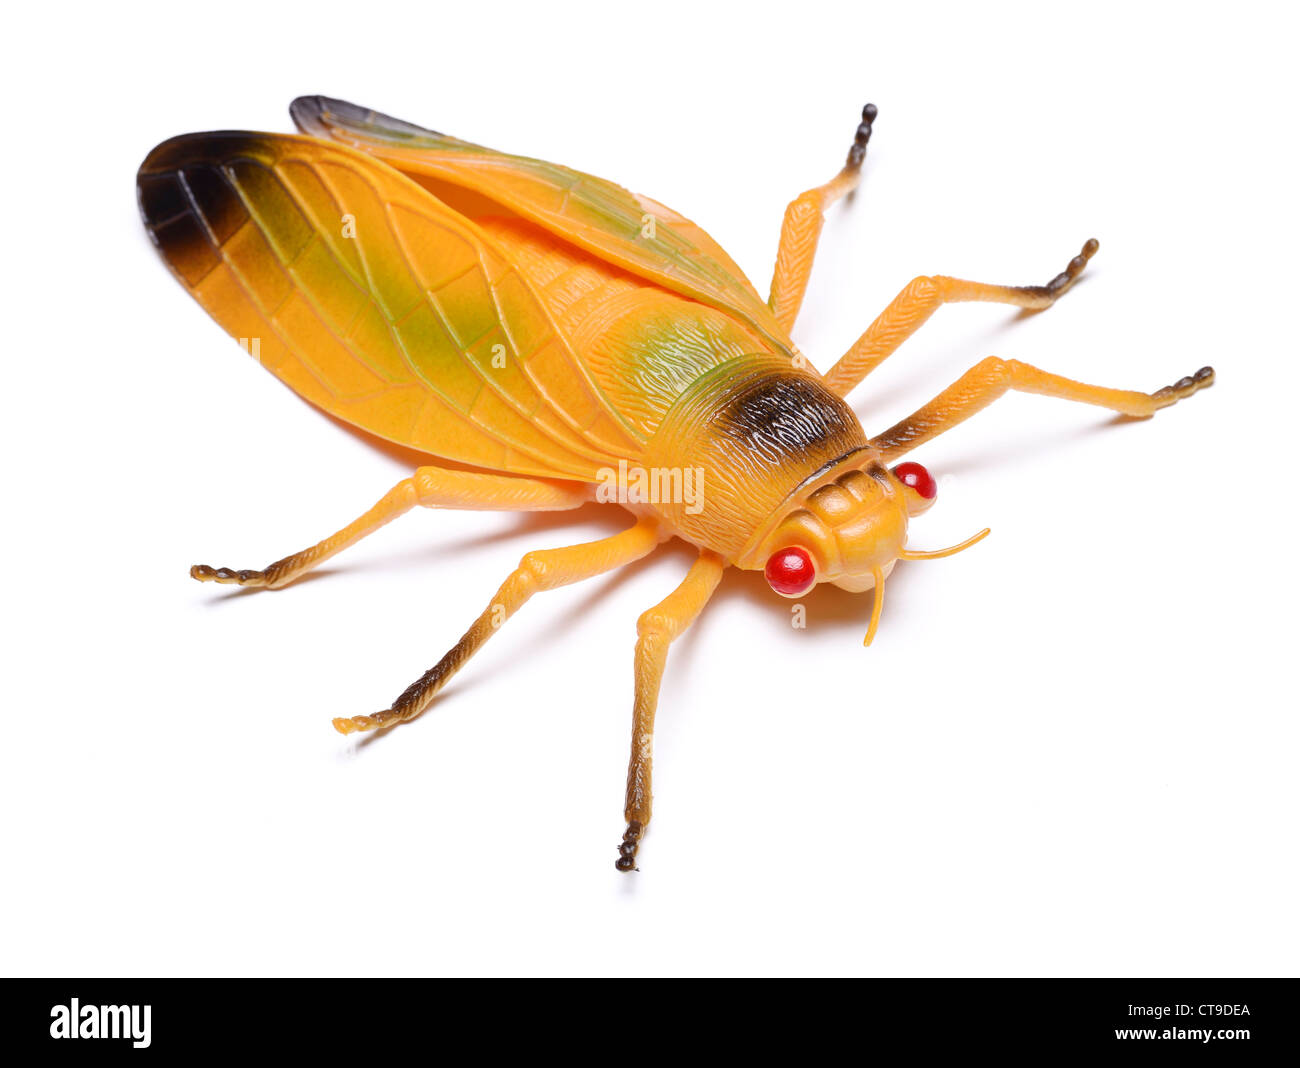 Yellow plastic toy insect Stock Photo